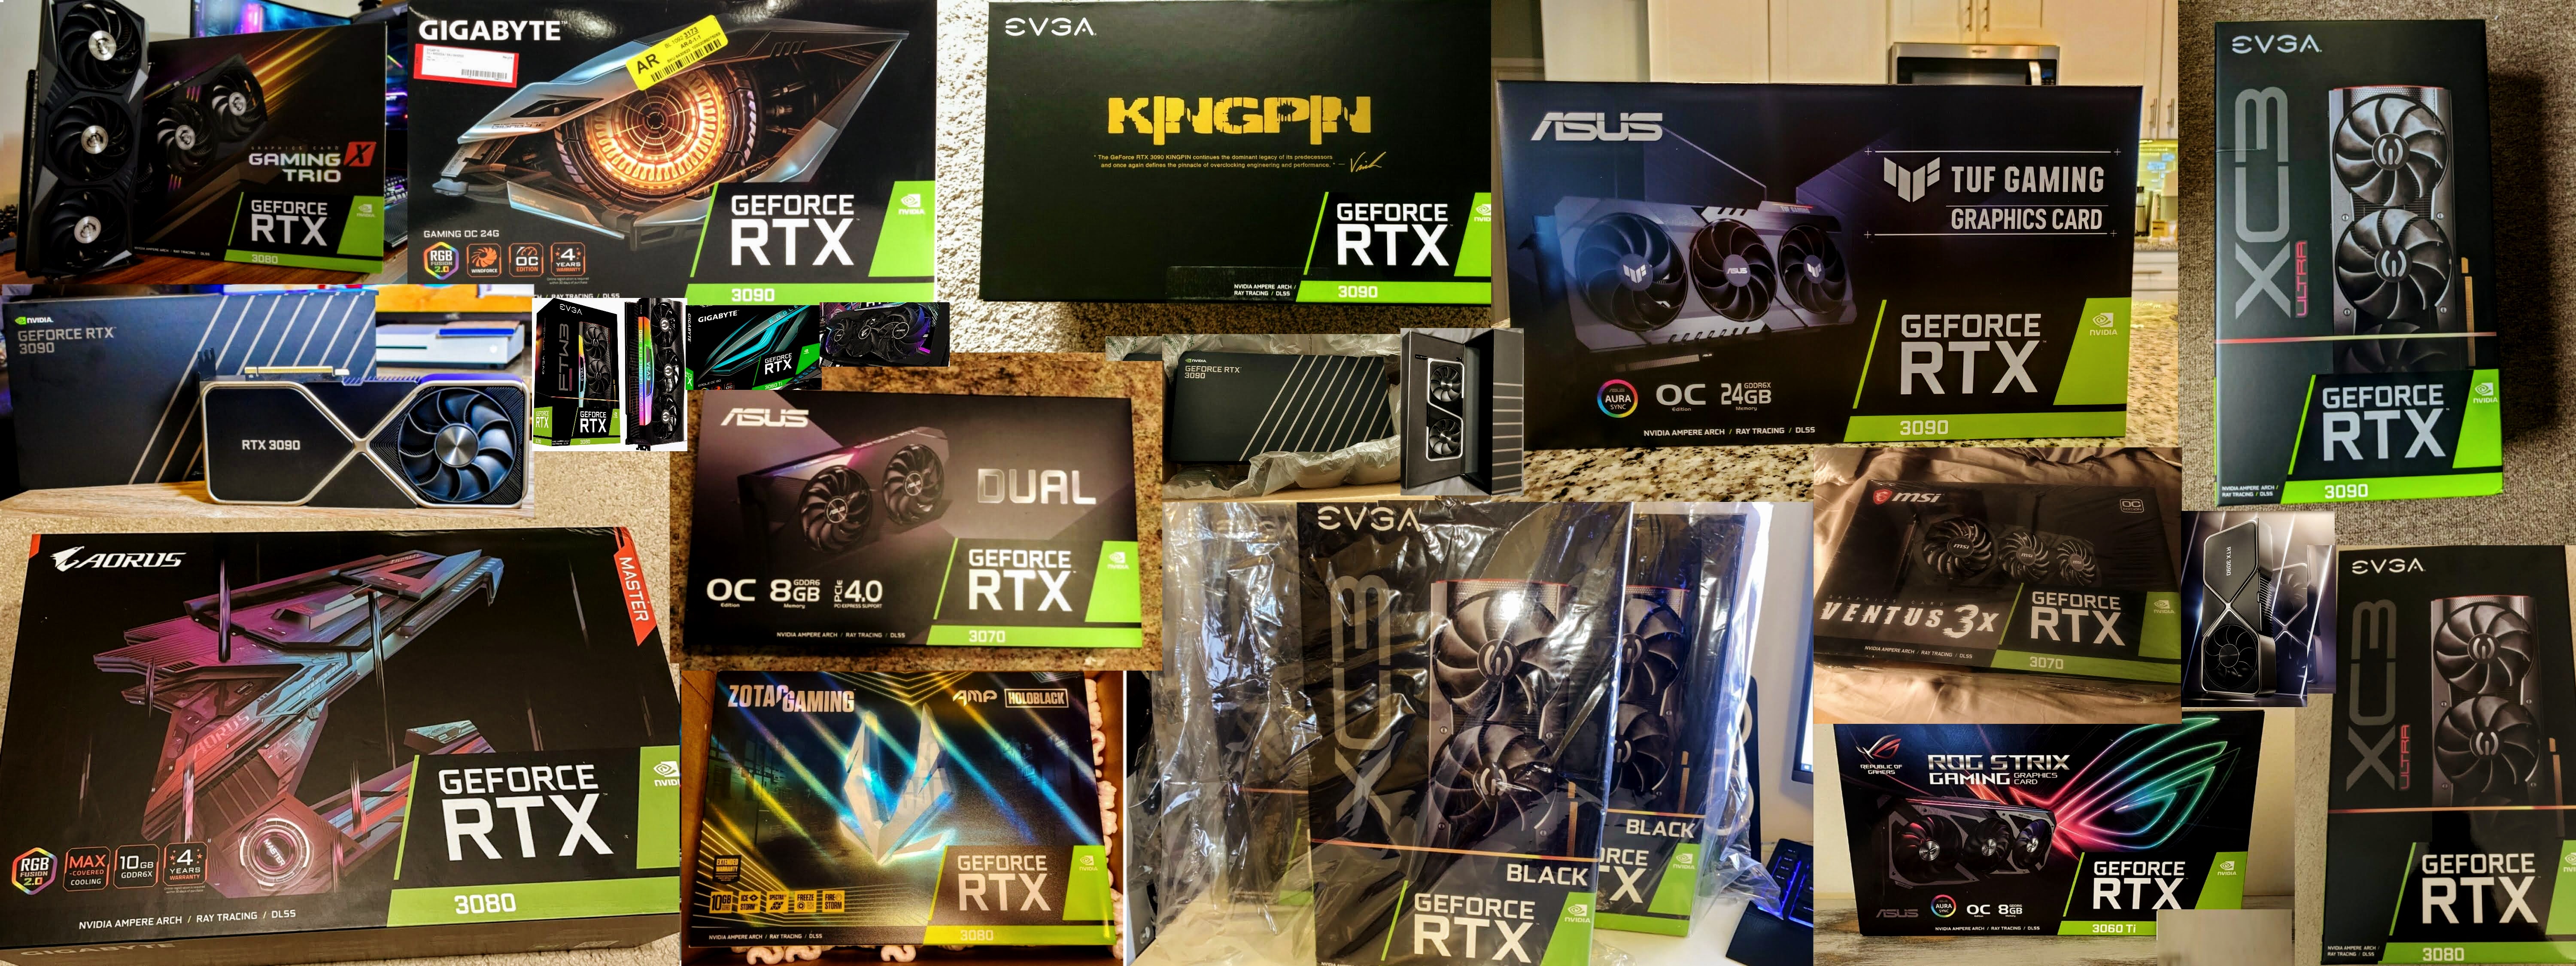 How to buy Nvidia RTX 3090, 3080, 3070, and 3060 ti GPUs?